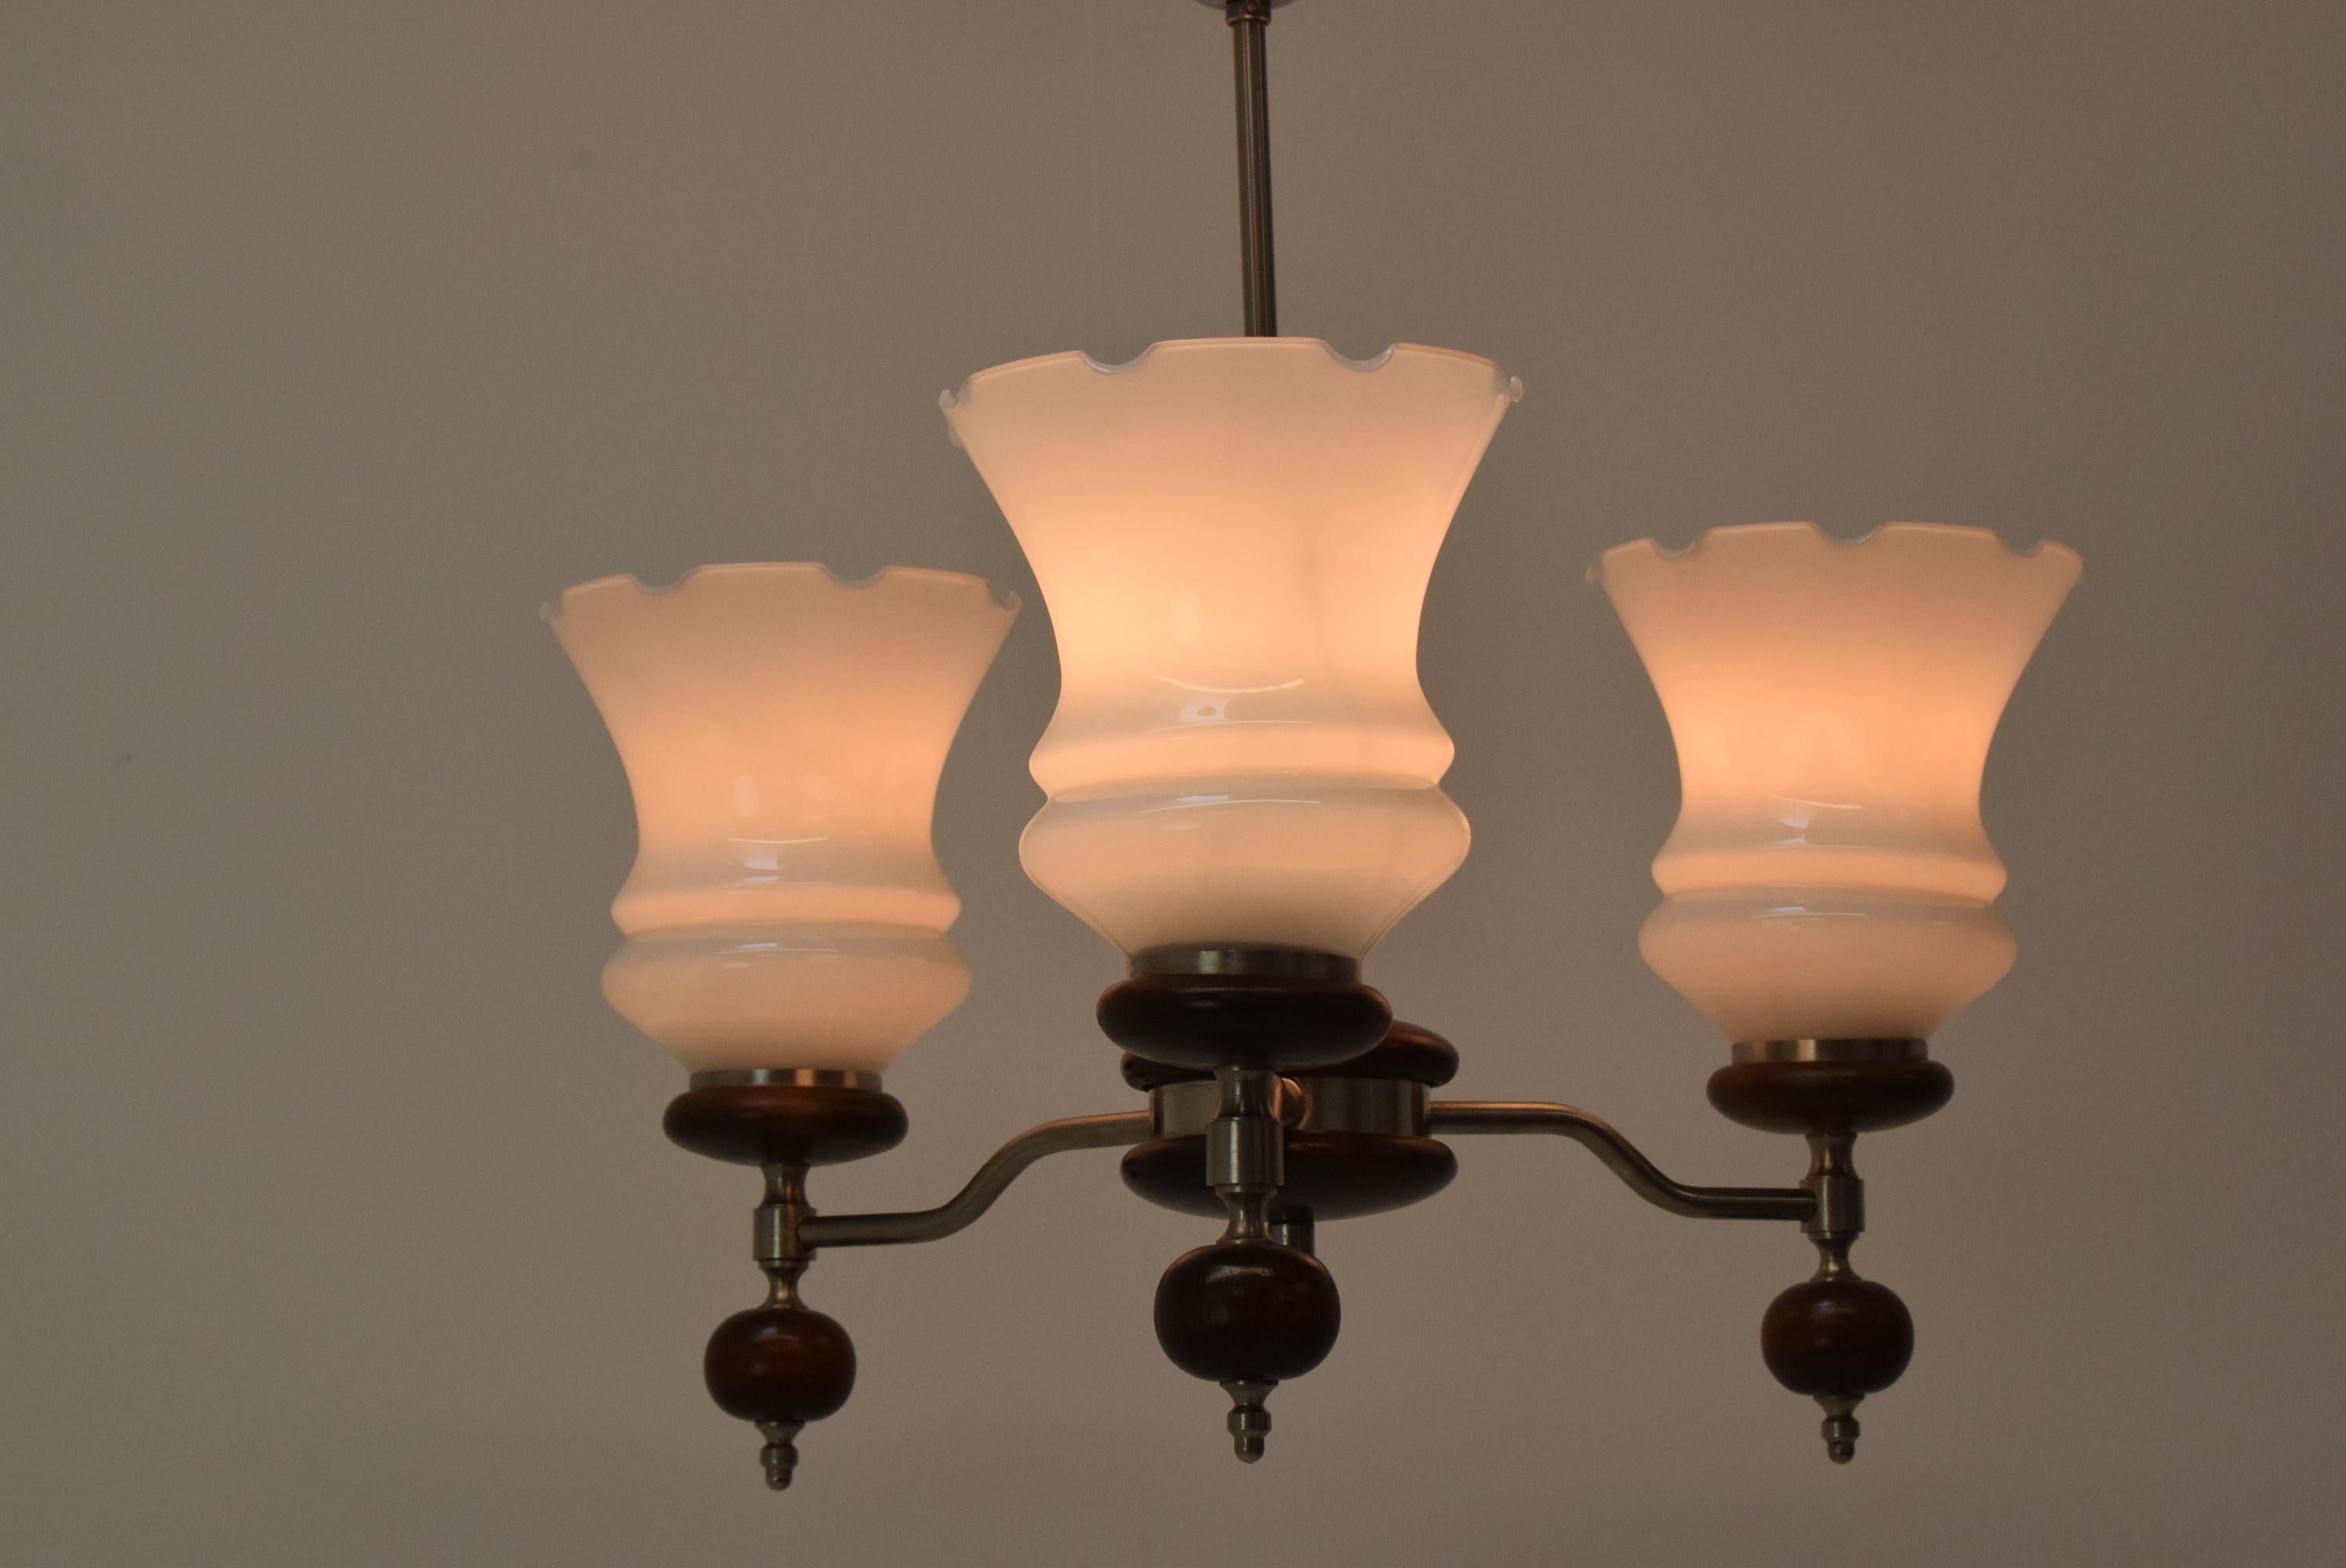 Made in Czechoslovakia
Made of Wood, Chrome and Glass
3xE27 or E26 Bulb
US Wiring Compatible
With aged Patina.